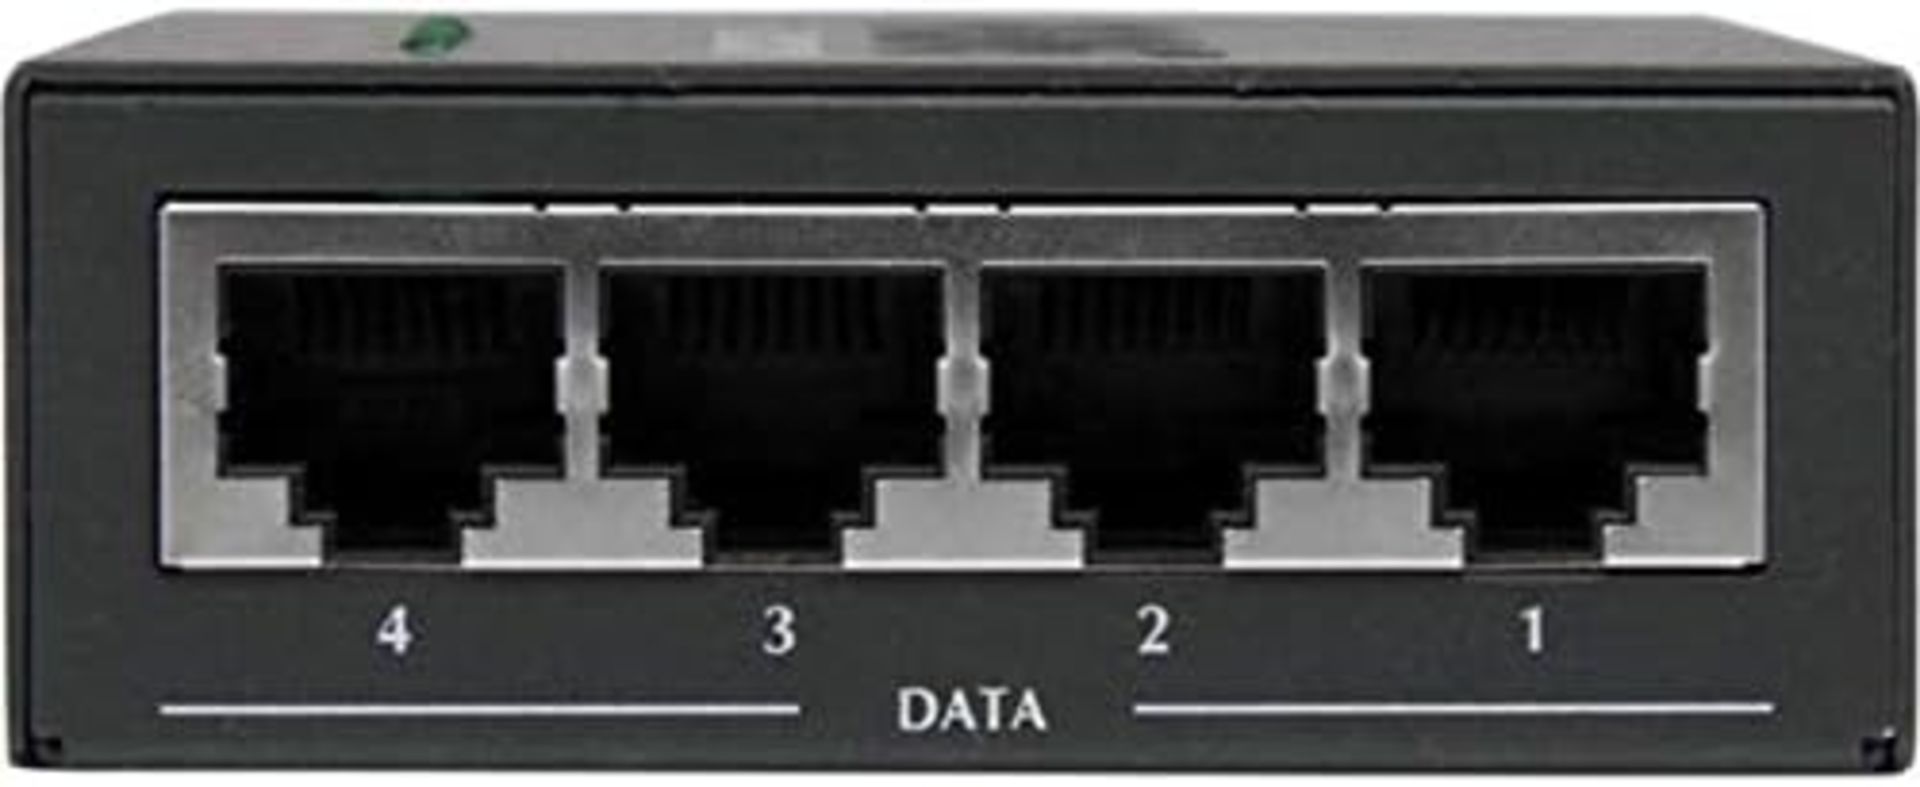 STARTECH 4 Port Gigabit Midspan - PoE+ Injector. RRP £208. More power, with less cost and hassle. - Image 2 of 5